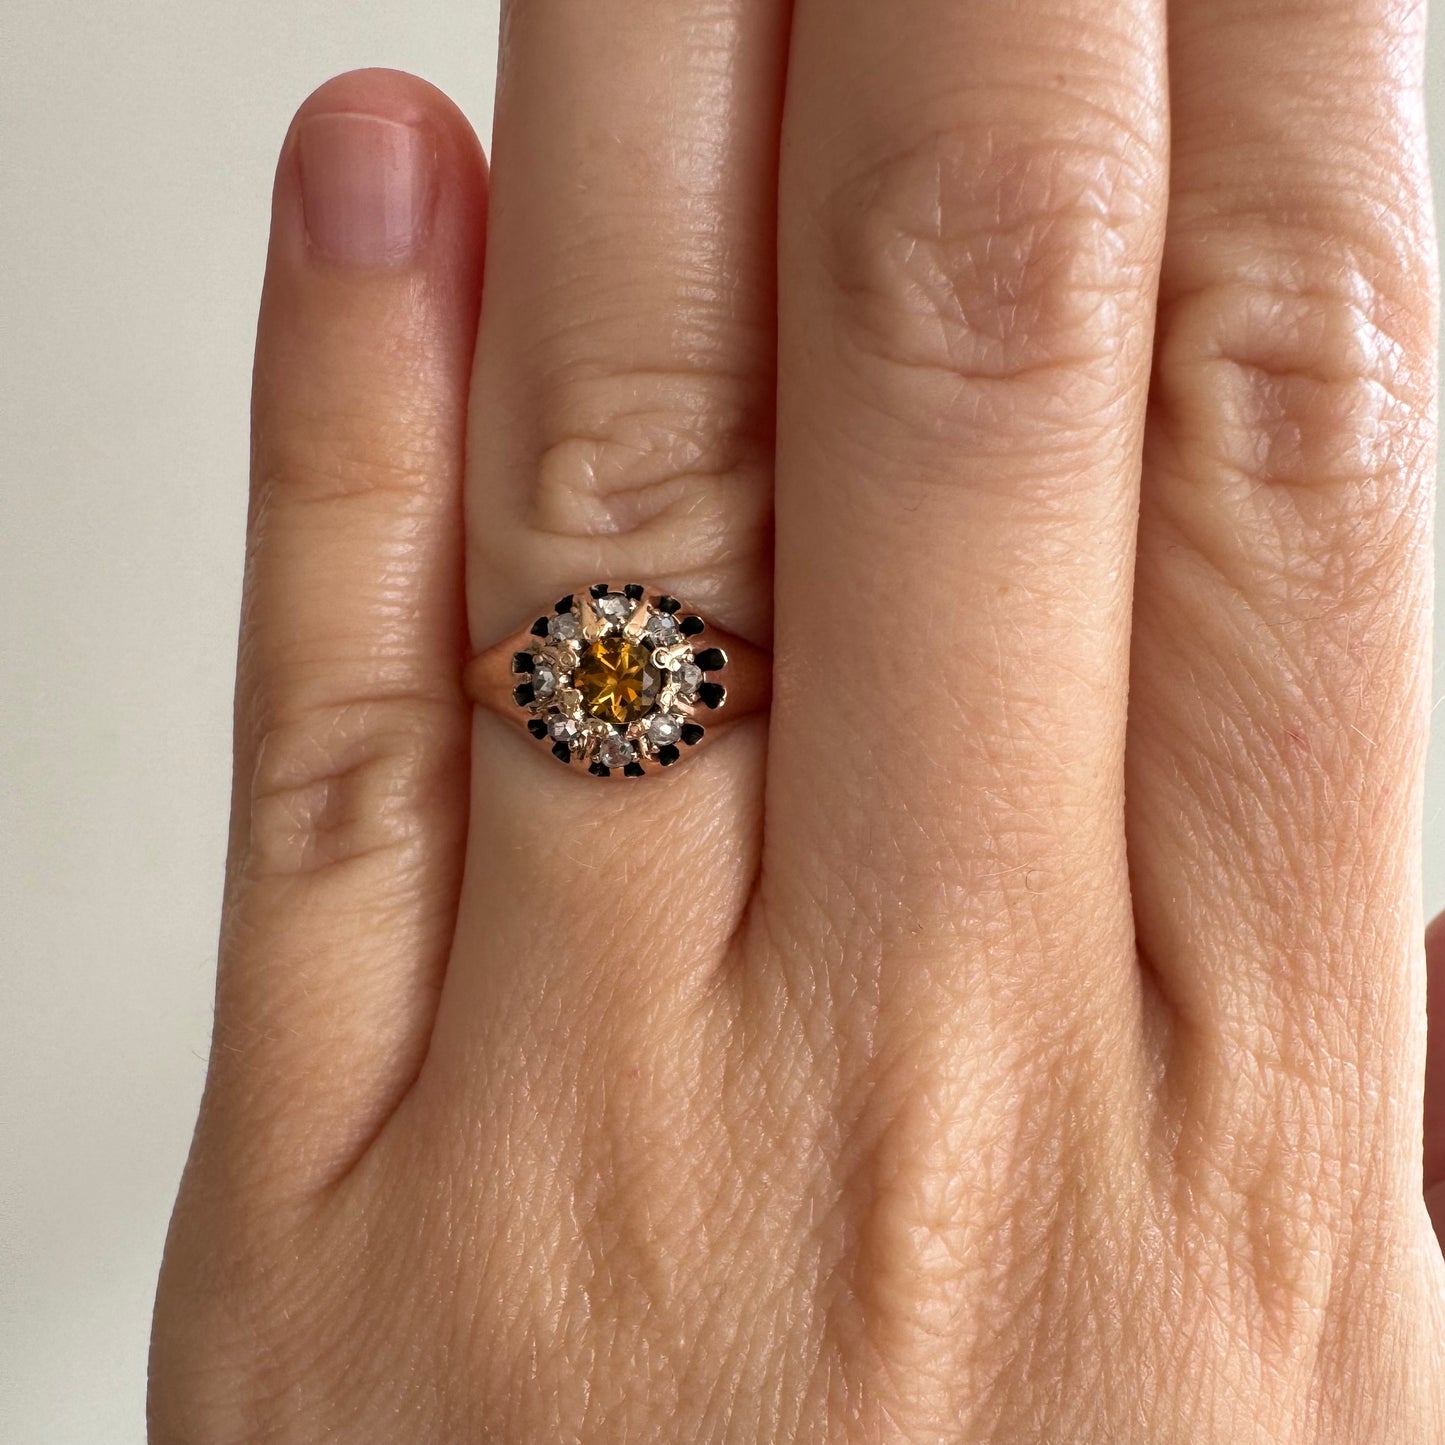 A N T I Q U E // daisy halo / 10k victorian rosy gold halo cluster ring with rose cut diamonds and citrine / size 5.75